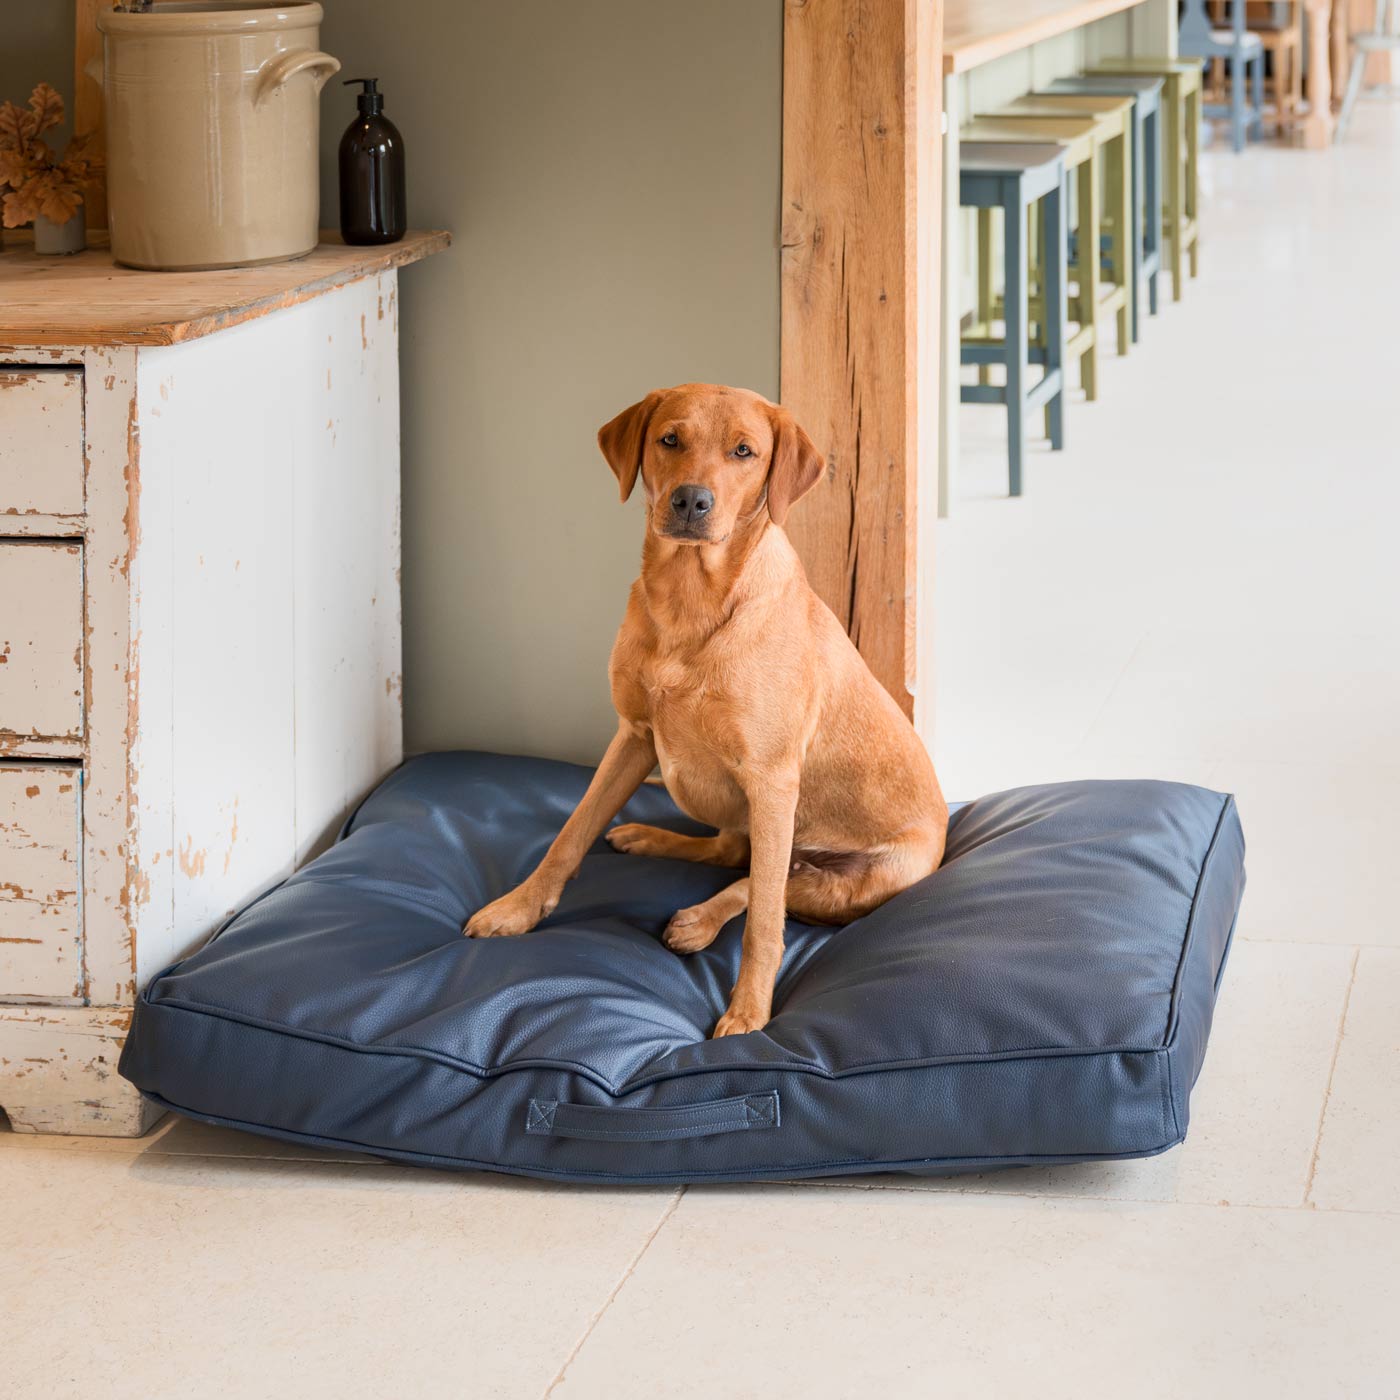 Luxury Dog Cushion in Rhino Tough Pacific Faux Leather, The Perfect Pet Bed Time Accessory! Available Now at Lords & Labradors